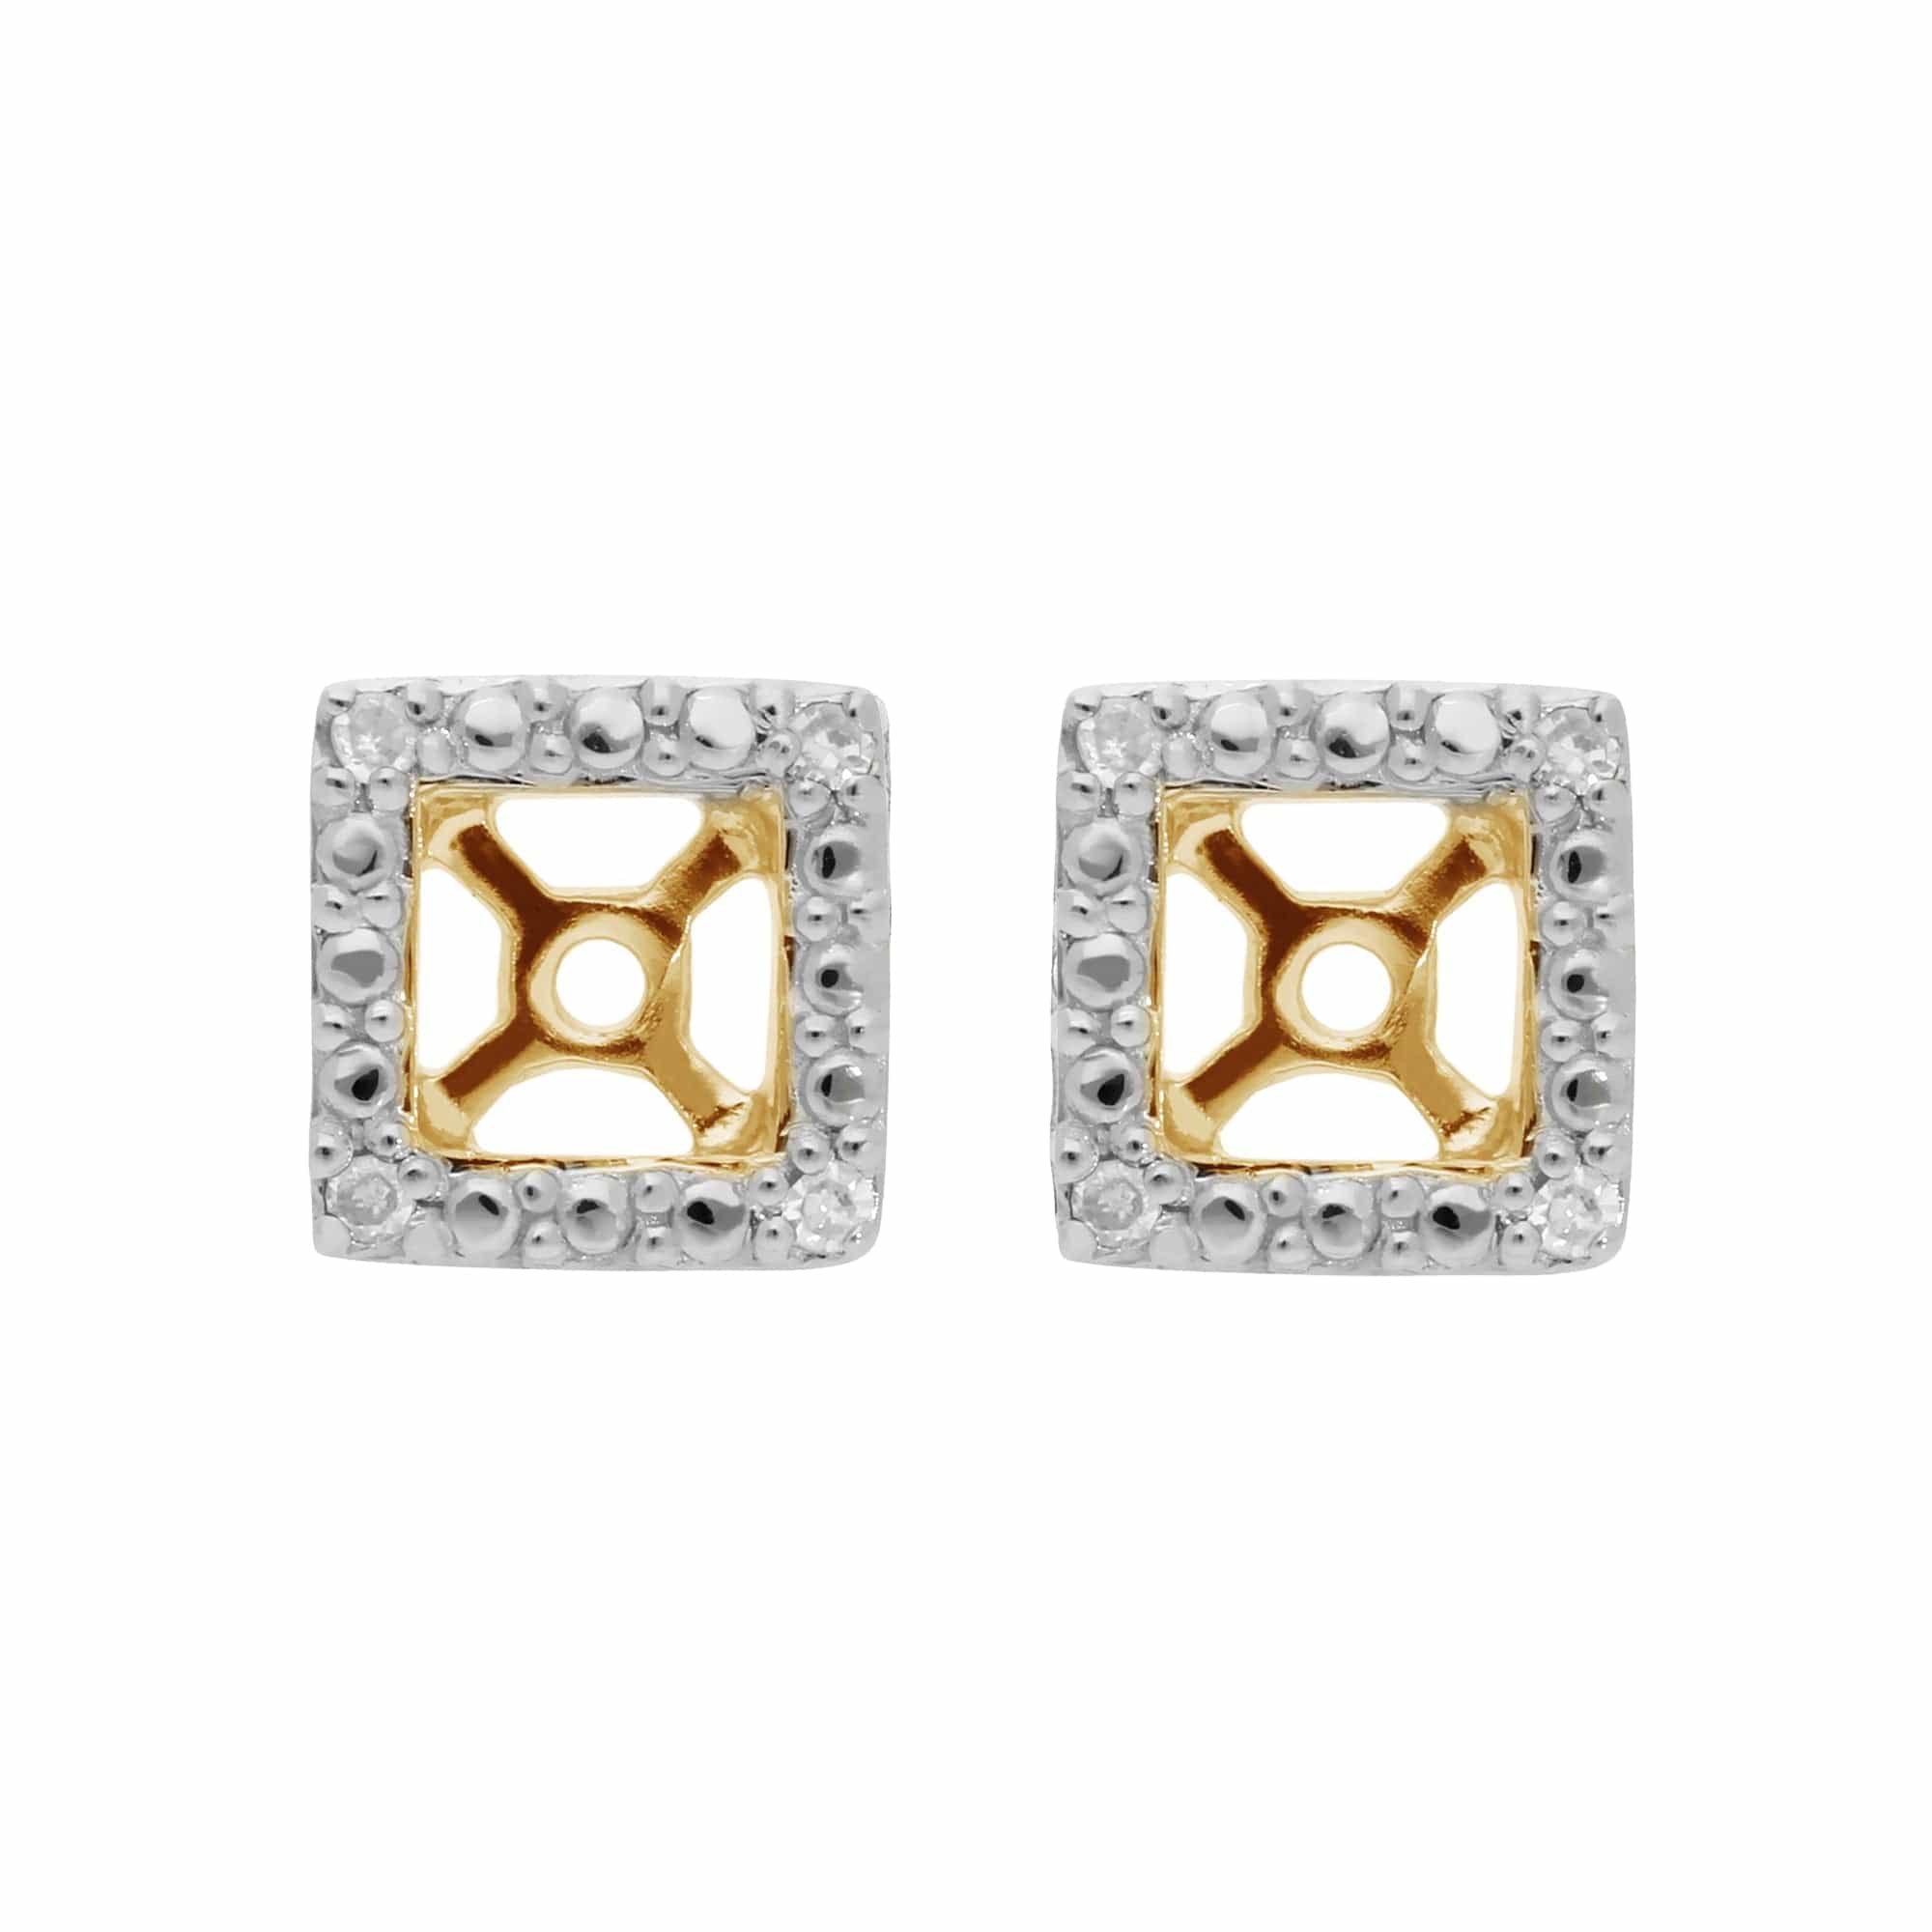 Classic Round Green Tourmaline Stud Earrings with Detachable Diamond Square Earrings Jacket Set in 9ct Yellow Gold - Gemondo